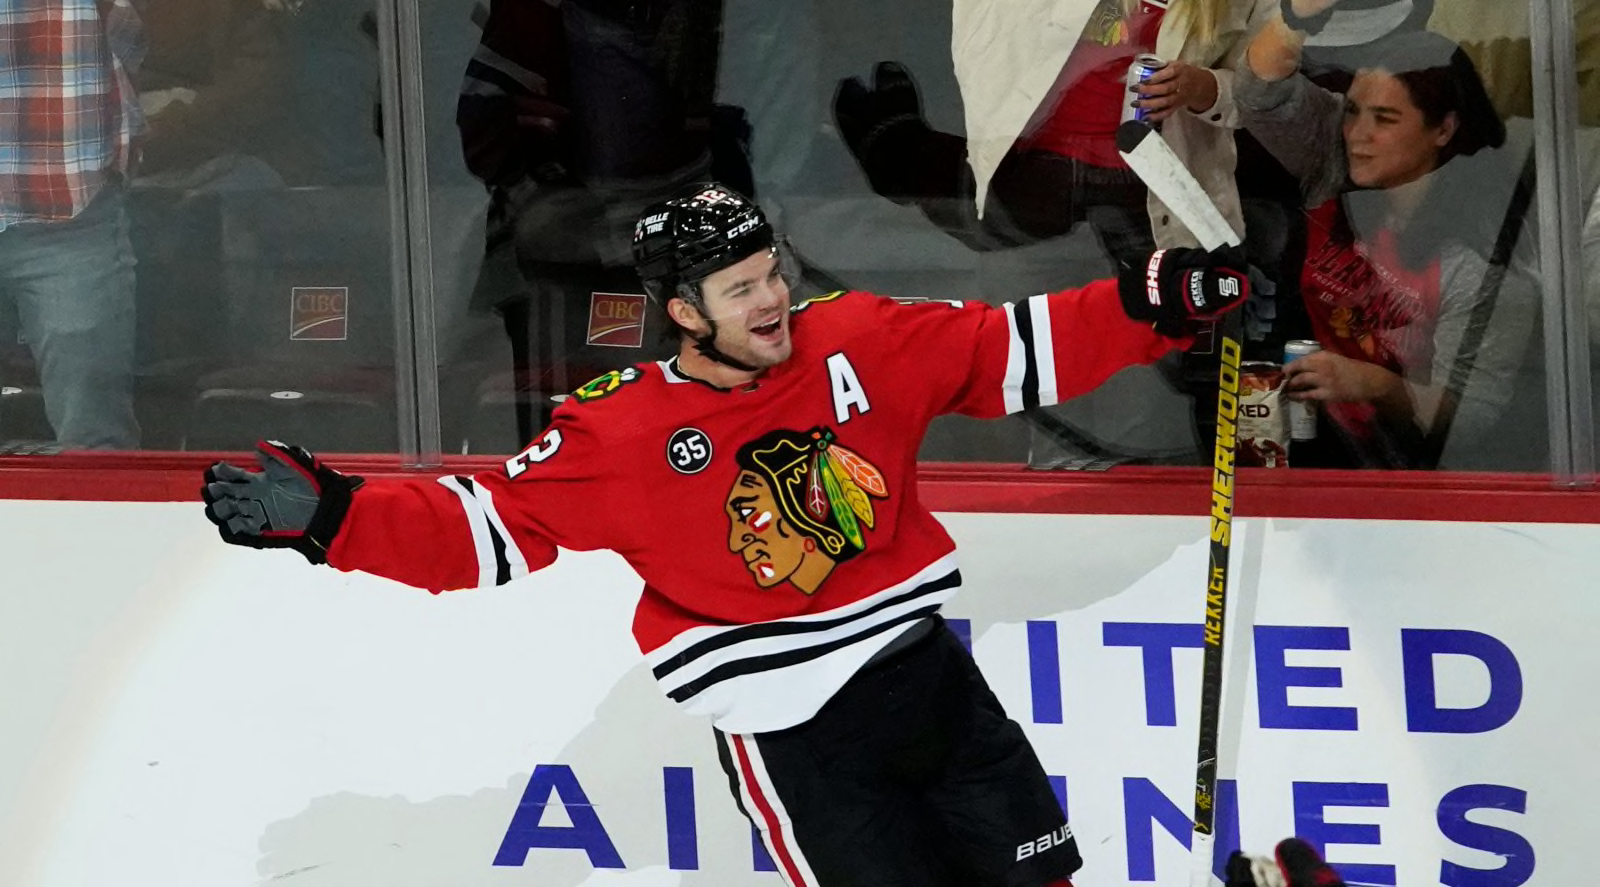 A major change for the Blackhawks is coming this year - and it